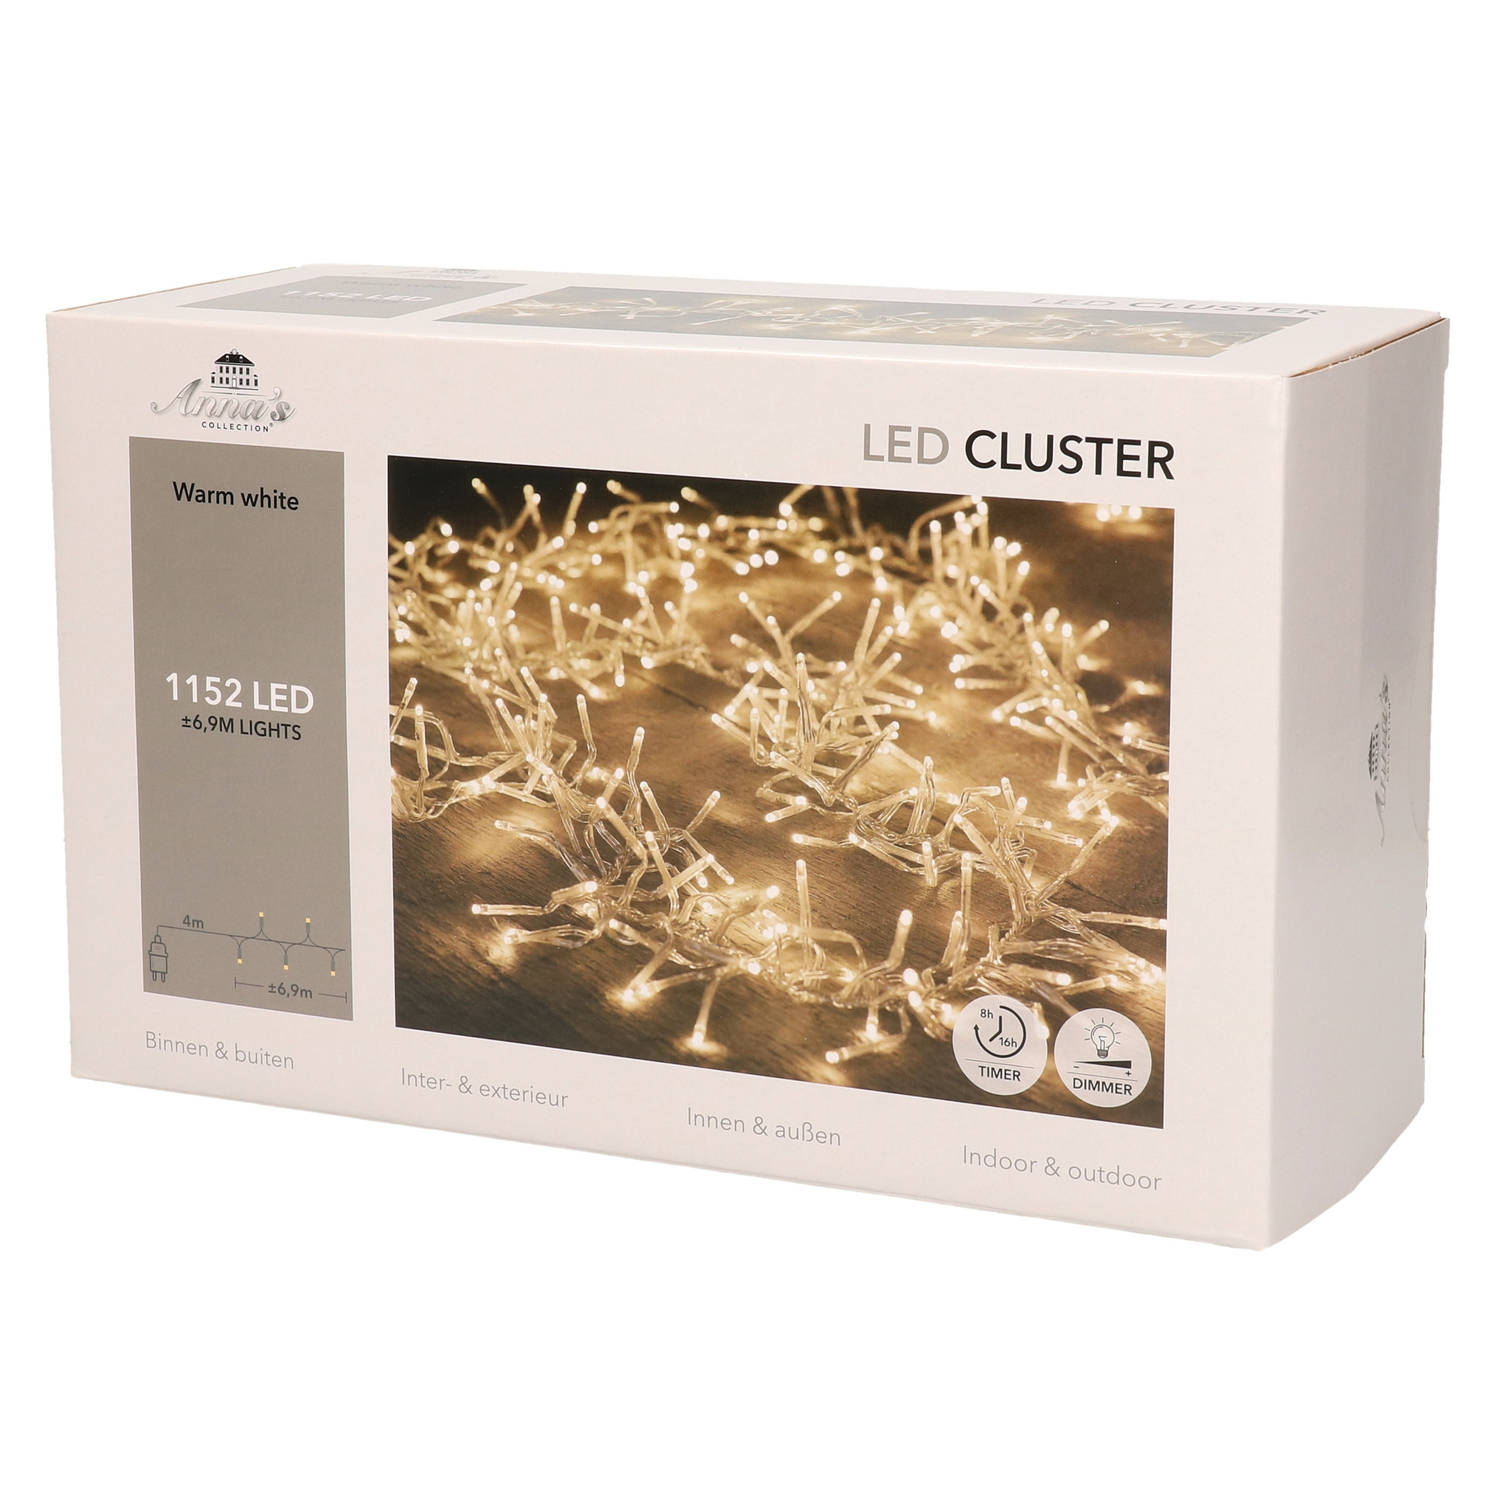 Clusterverlichting 1152 LED s warm wit Anna's Collection